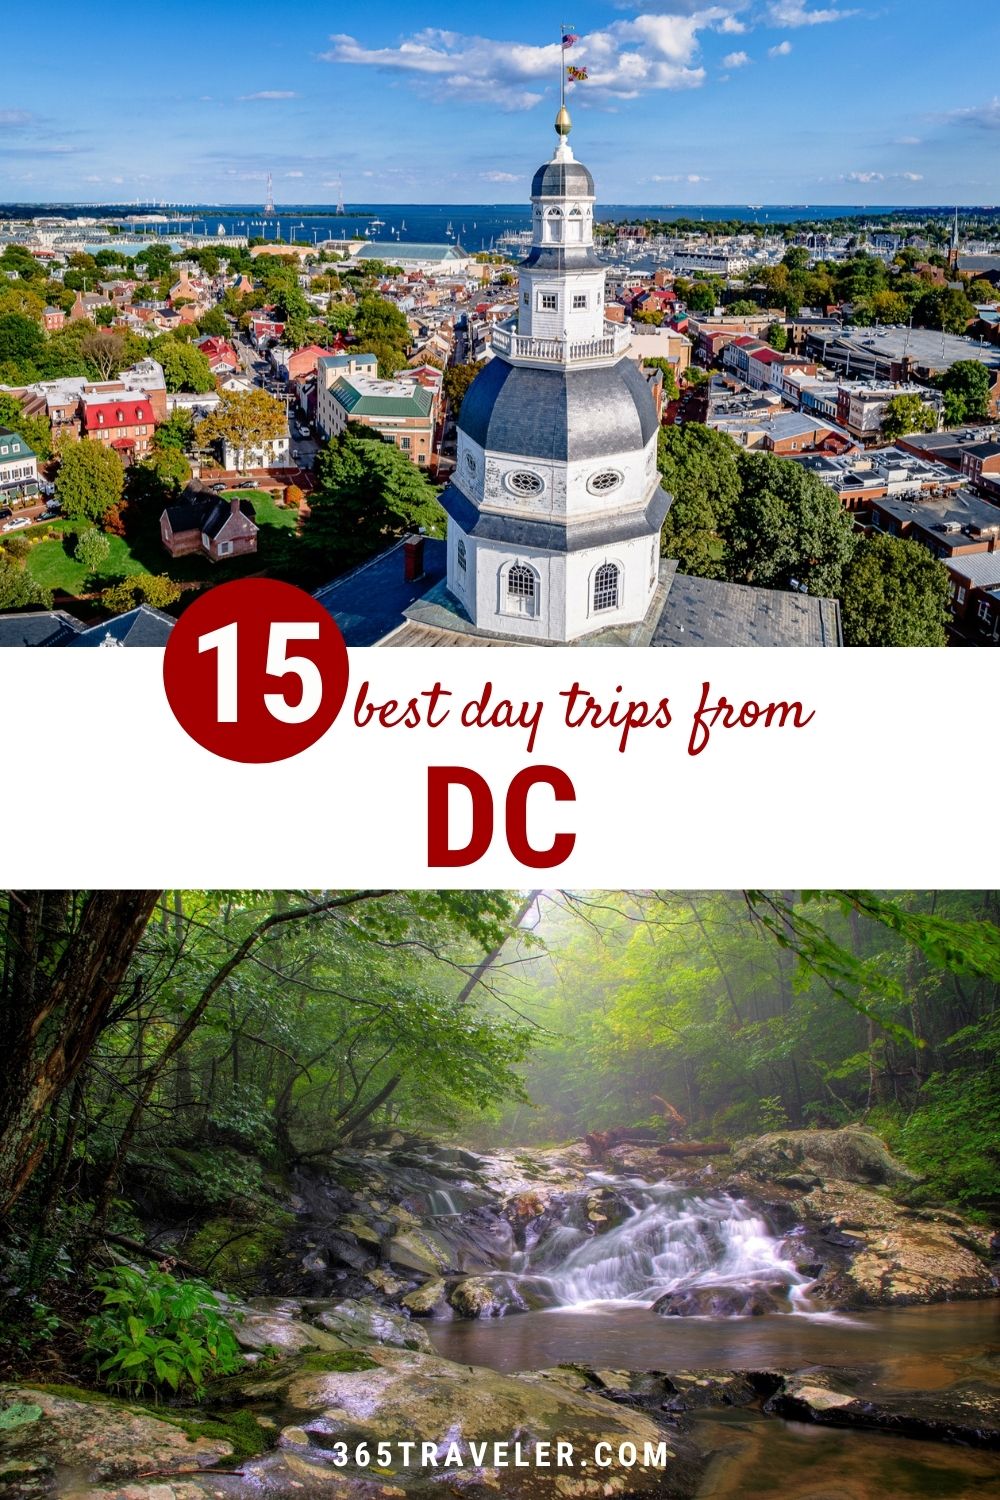 15 FUN DAY TRIPS FROM DC YOU'VE GOT TO EXPERIENCE